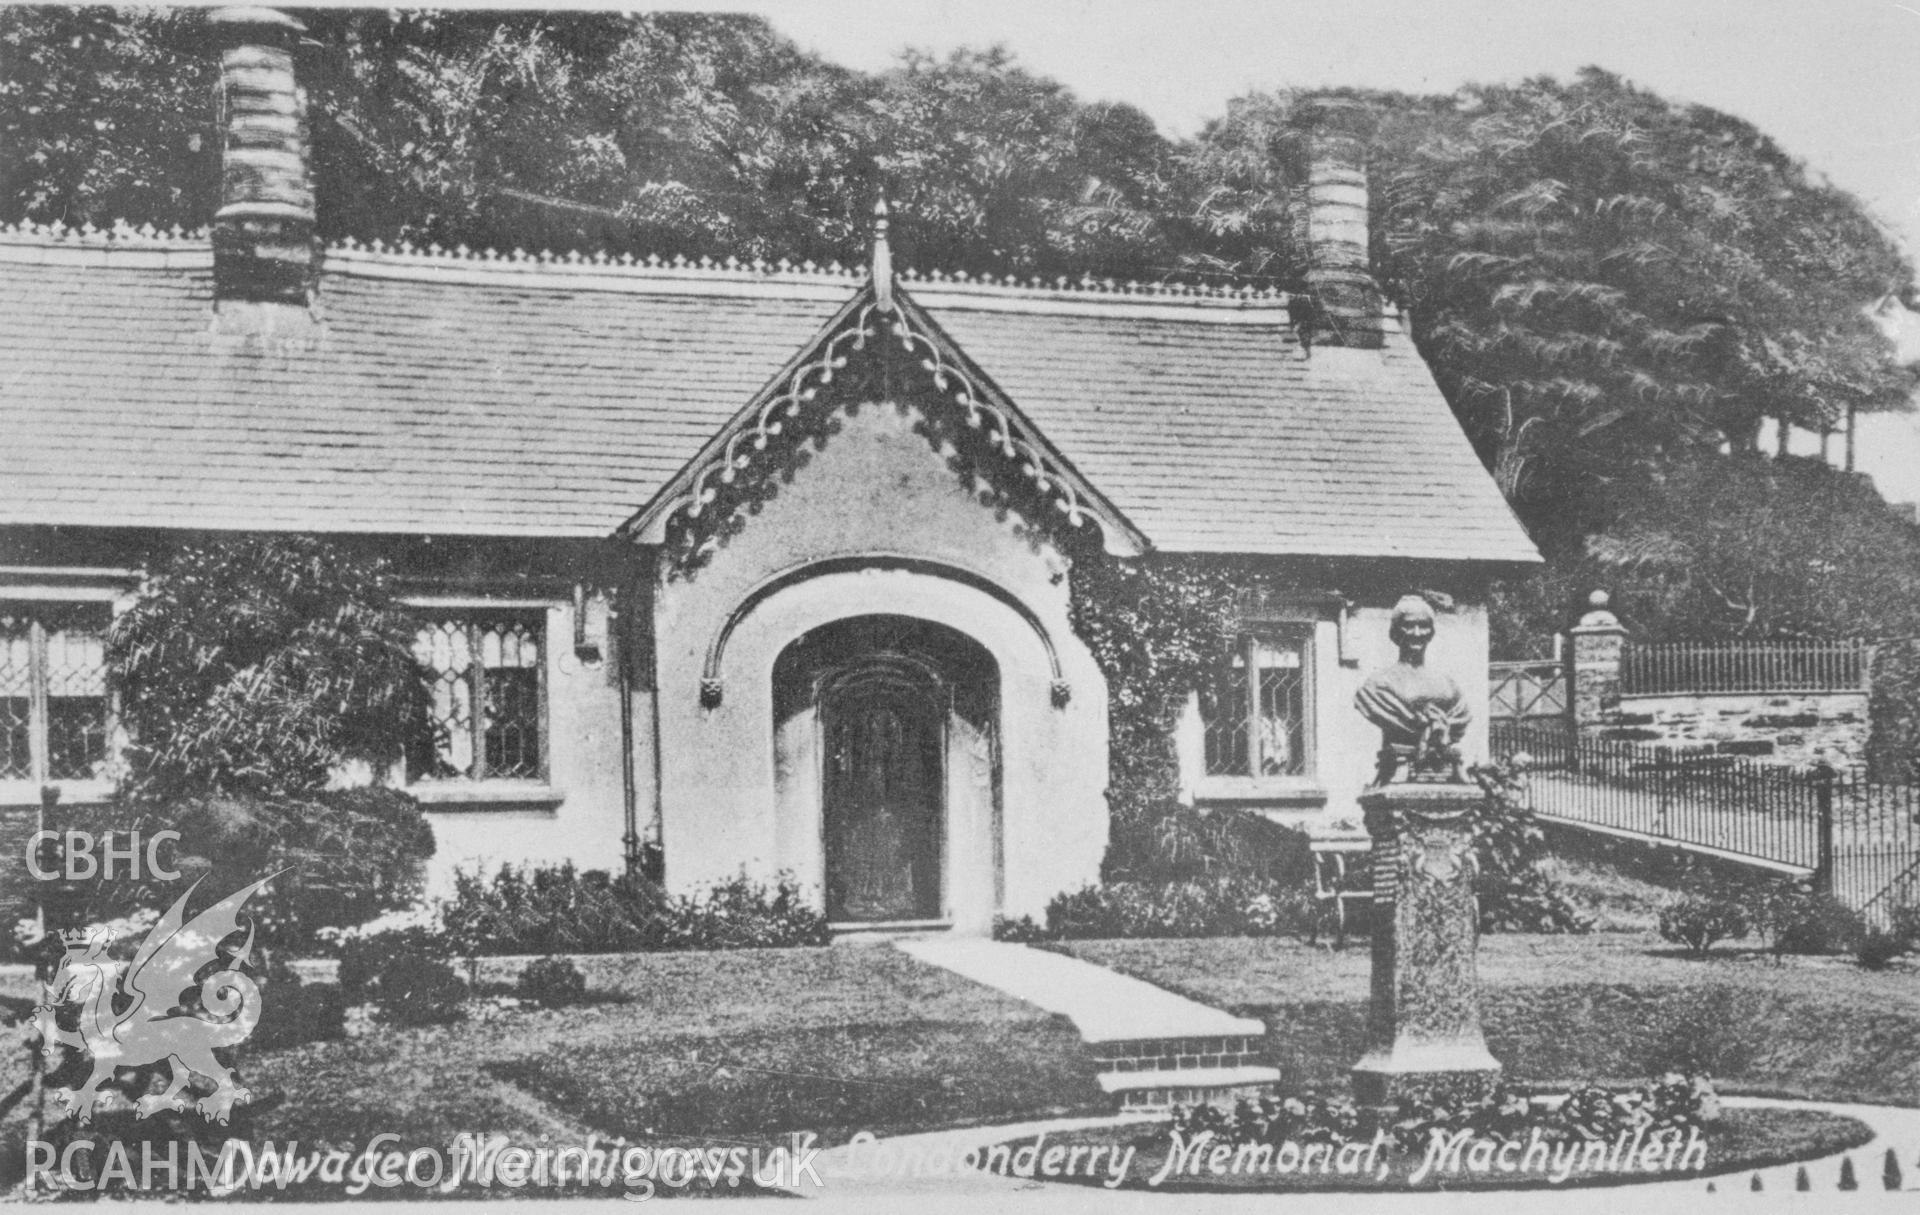 Copy of black and white image of Vane Almshouse, Machynlleth, copied from early undated postcard showing exterior and the Dowager Marchioness of Londonderry Memorial, loaned by Thomas Lloyd.